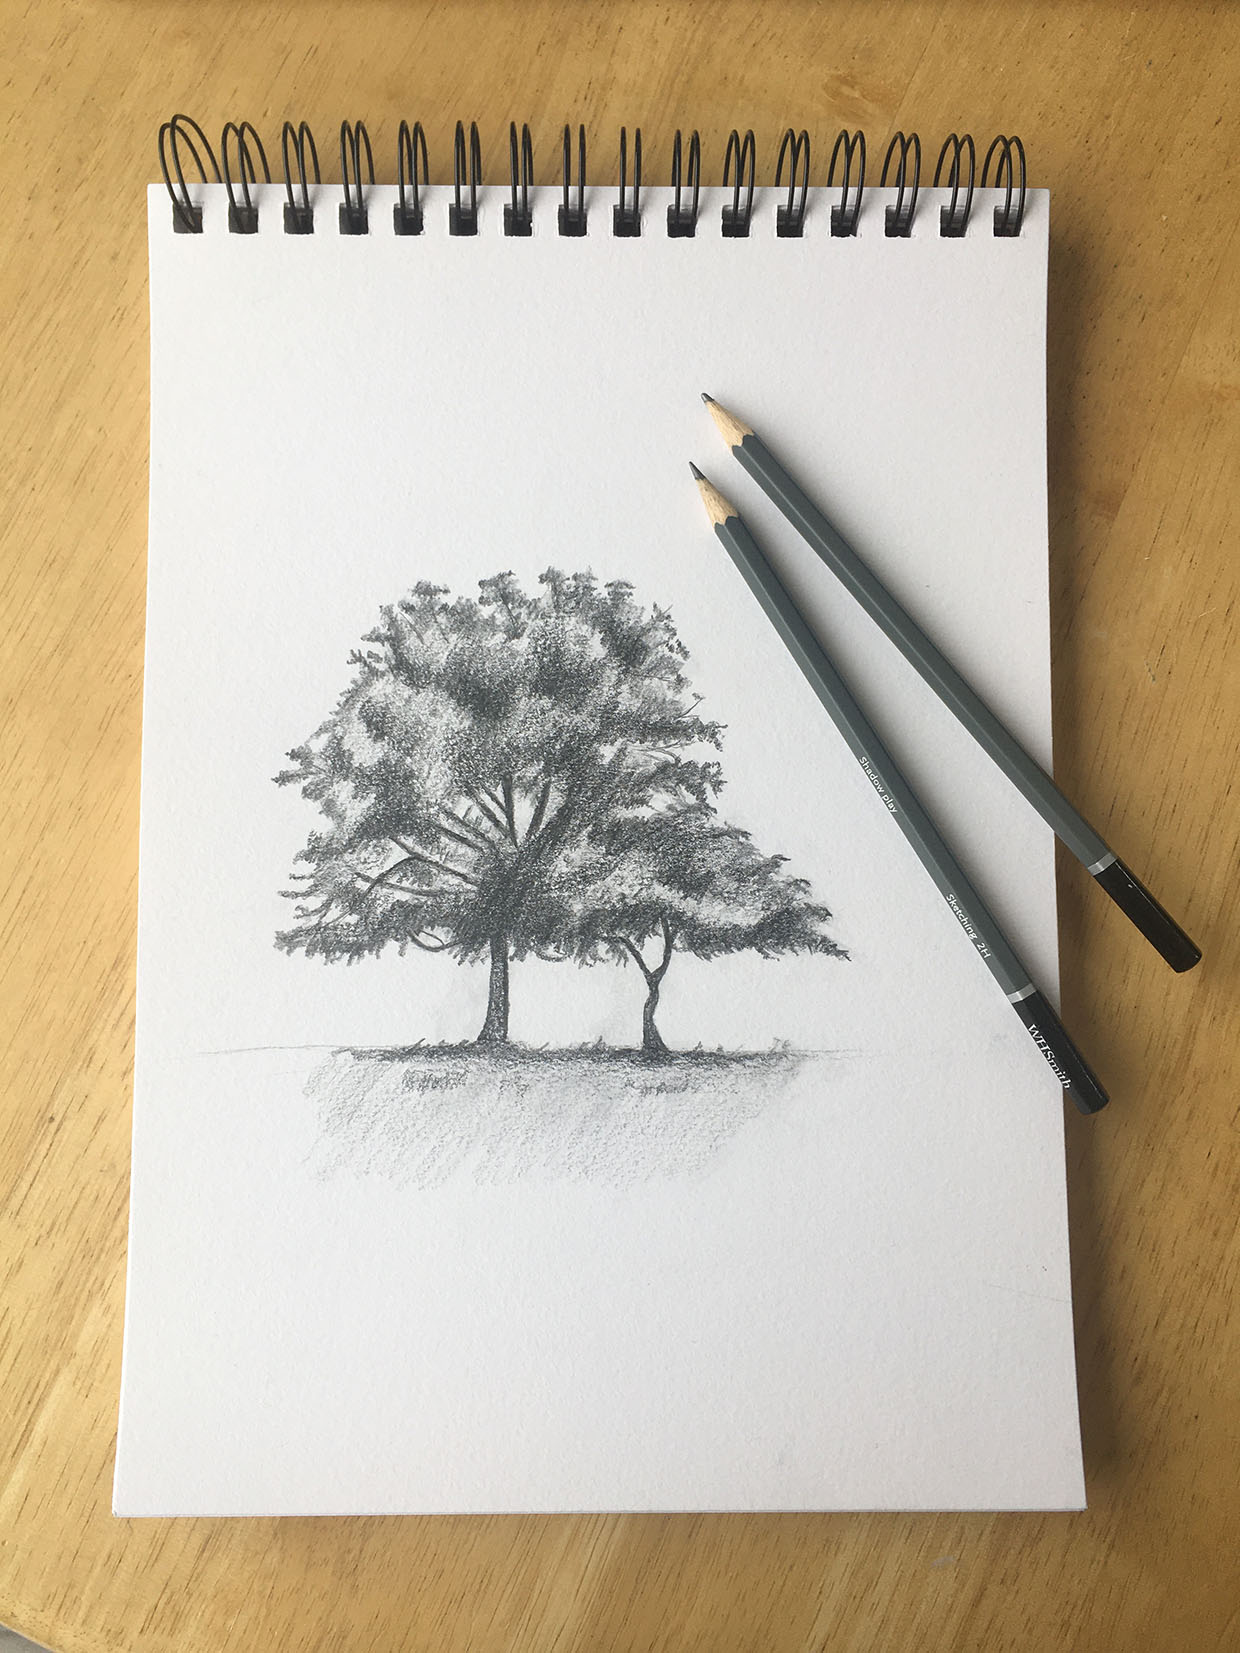 How to Draw a Tree (Realistic) - YouTube